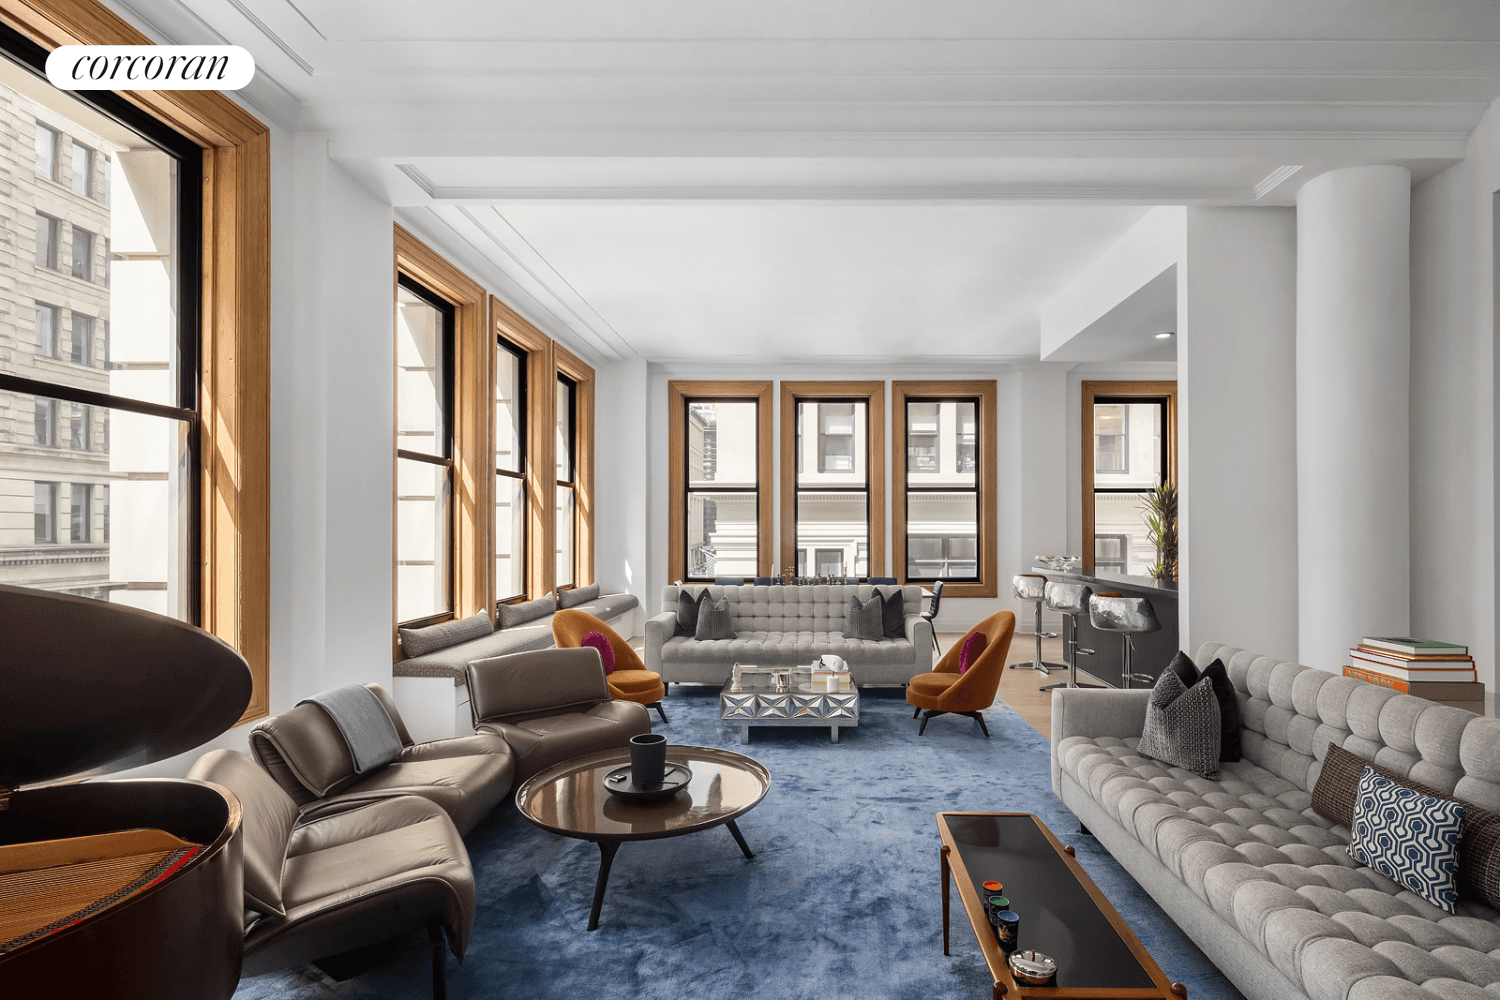 Impeccably renovated and designed, this prewar corner residence has the grandest loft feel with nearly 13 foot ceilings, 9 foot huge windows which bask the home with incredible light, and ...